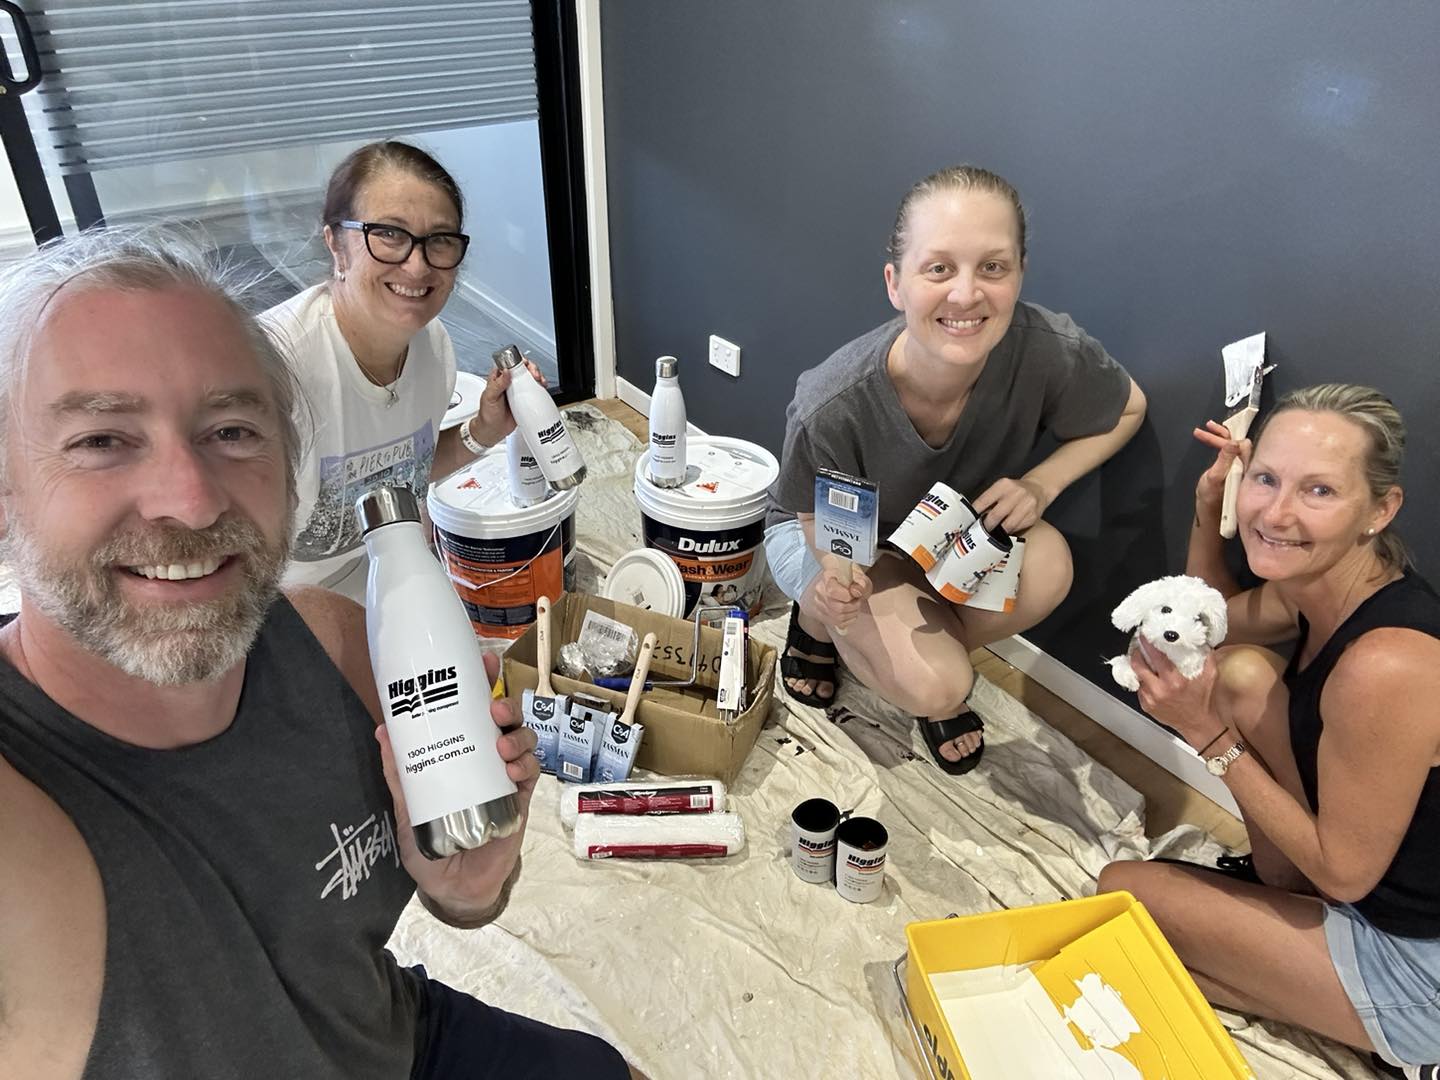 Ashton and his team painting their new office